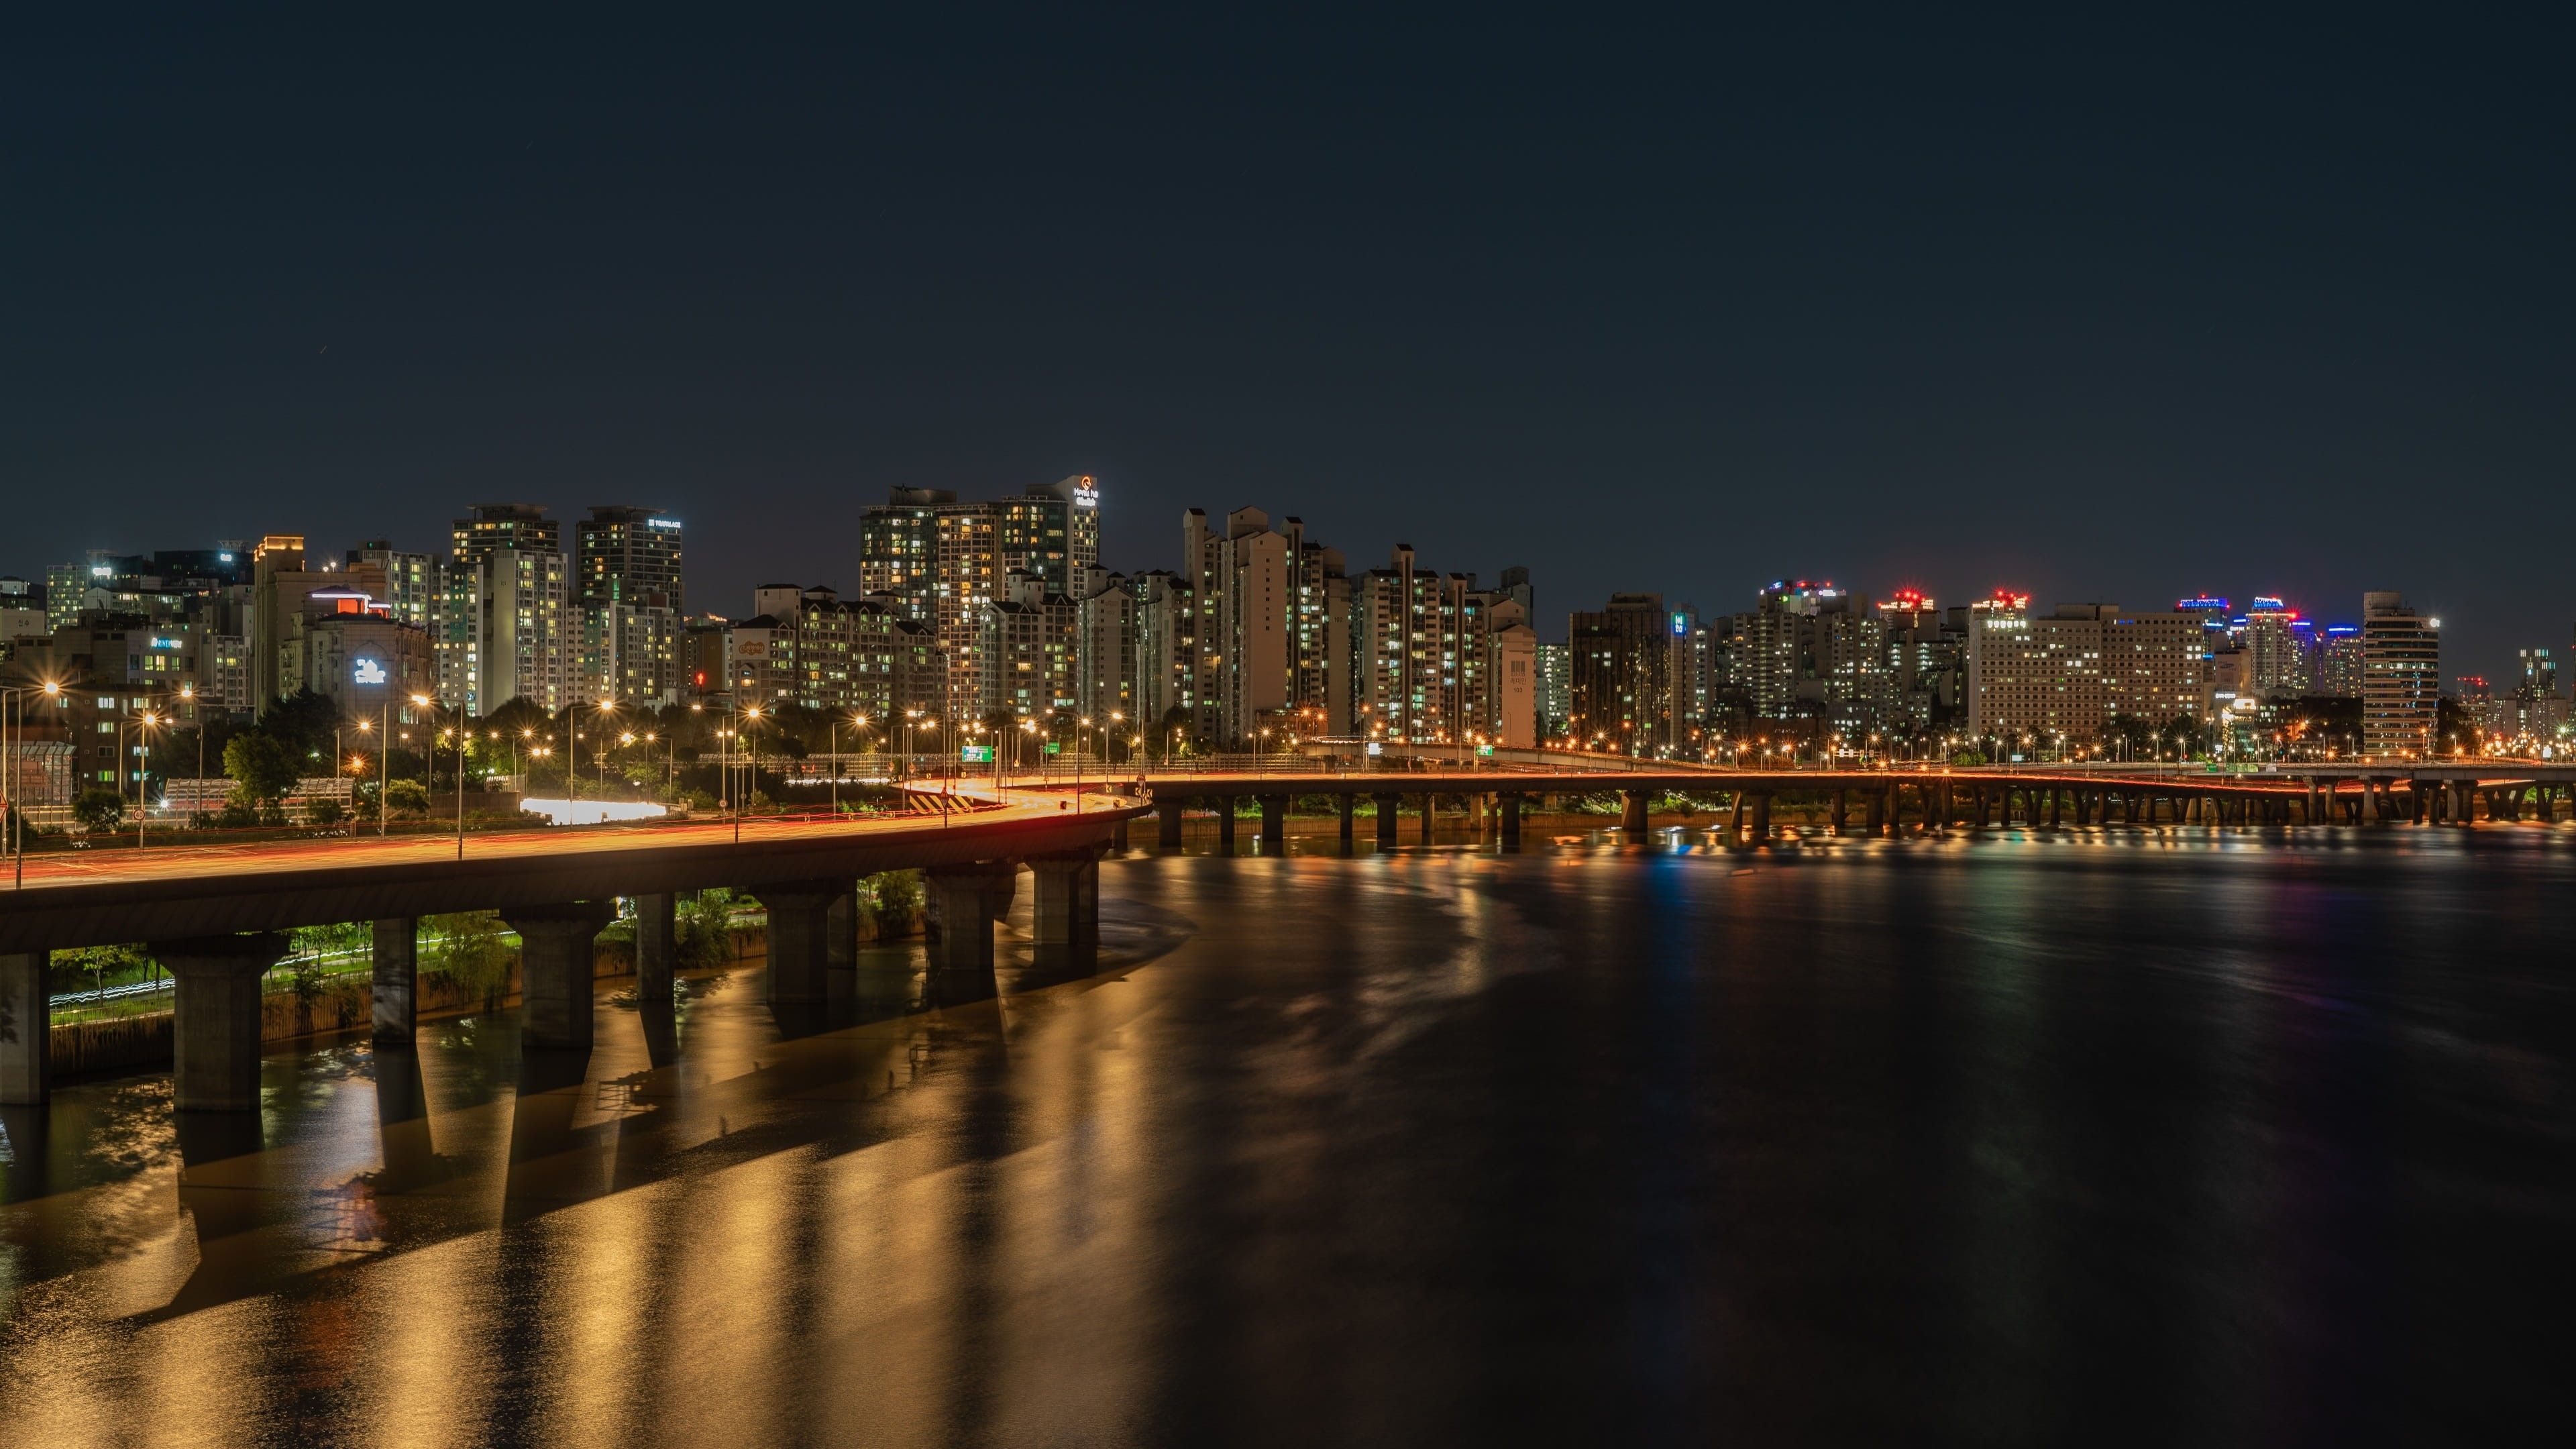 A night time view of the Han River in Seoul, South Korea. - Seoul